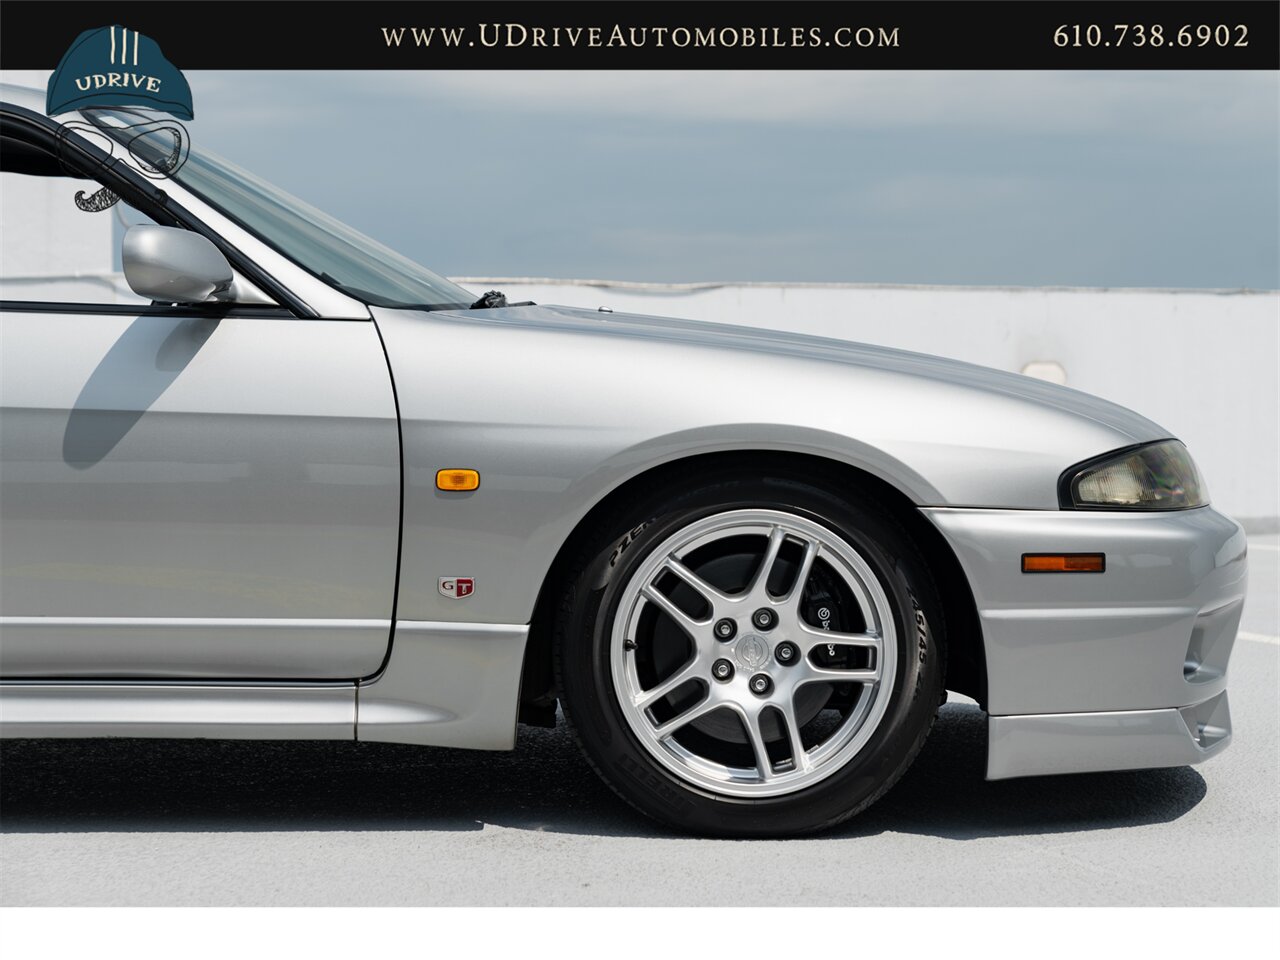 1997 Nissan Skyline GT-R R33 28k Miles Collector Grade  Motorex Legally Imported Titled Federalized Service History - Photo 14 - West Chester, PA 19382